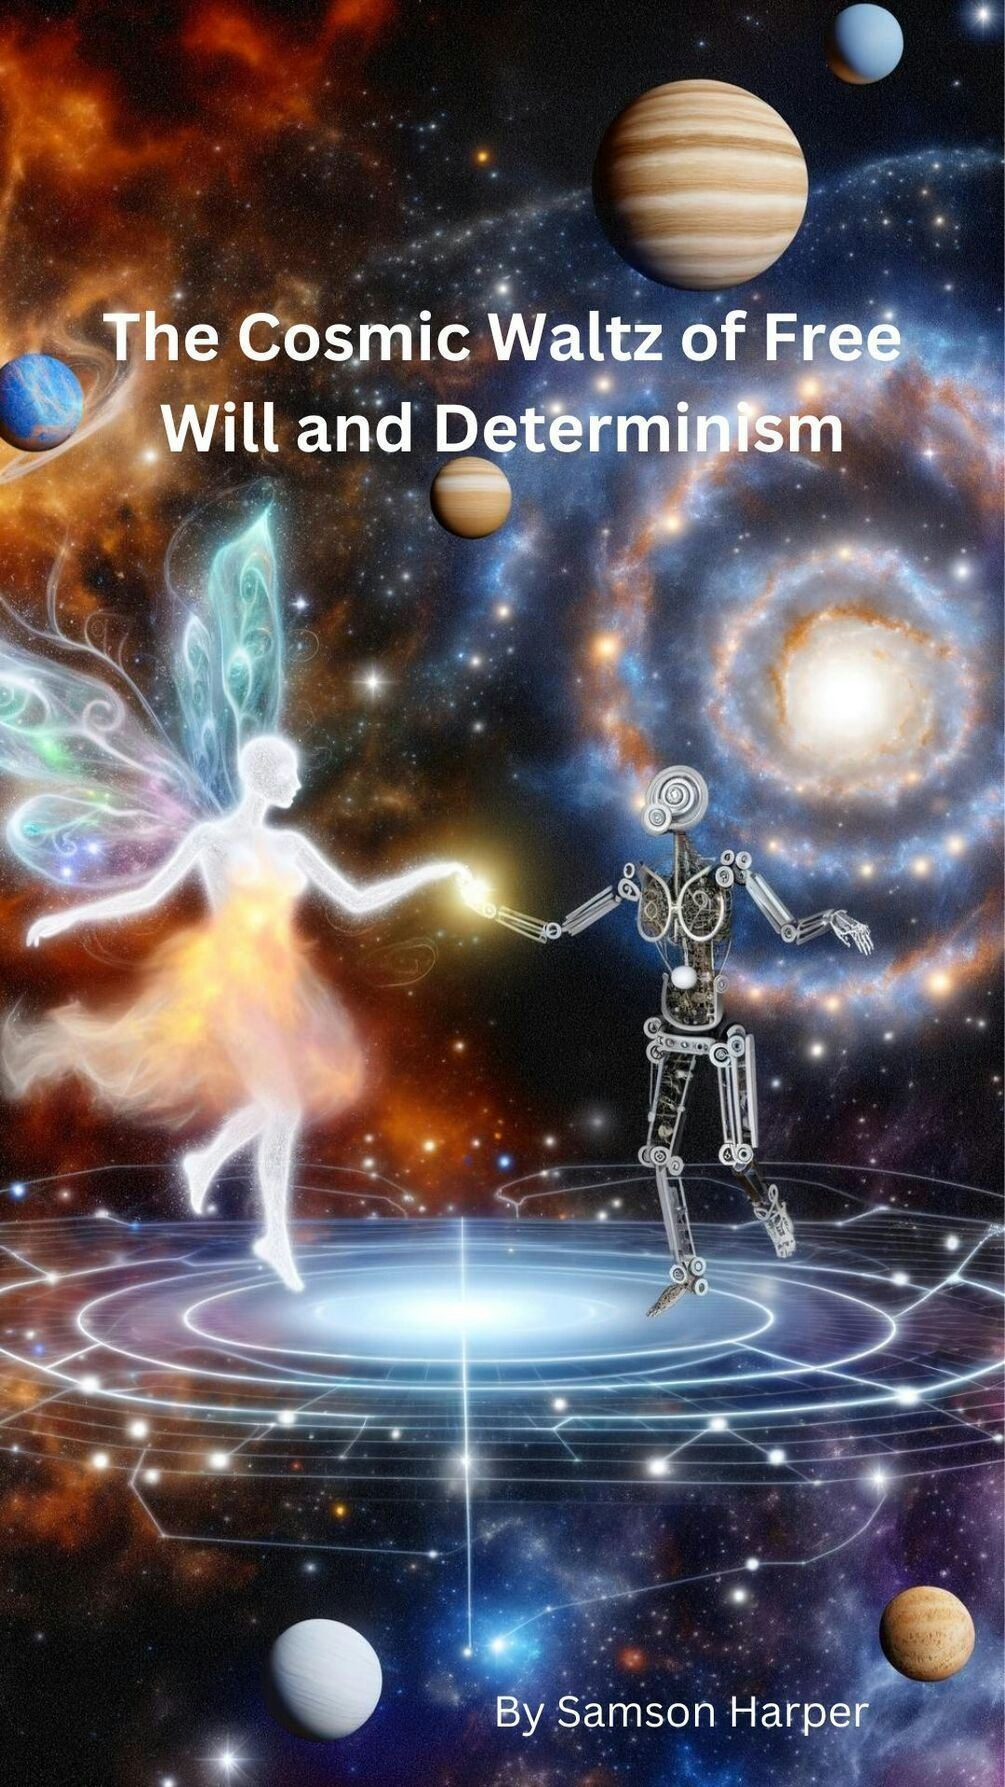 The Cosmic Waltz of Free Will and Determinism by Samson Harper